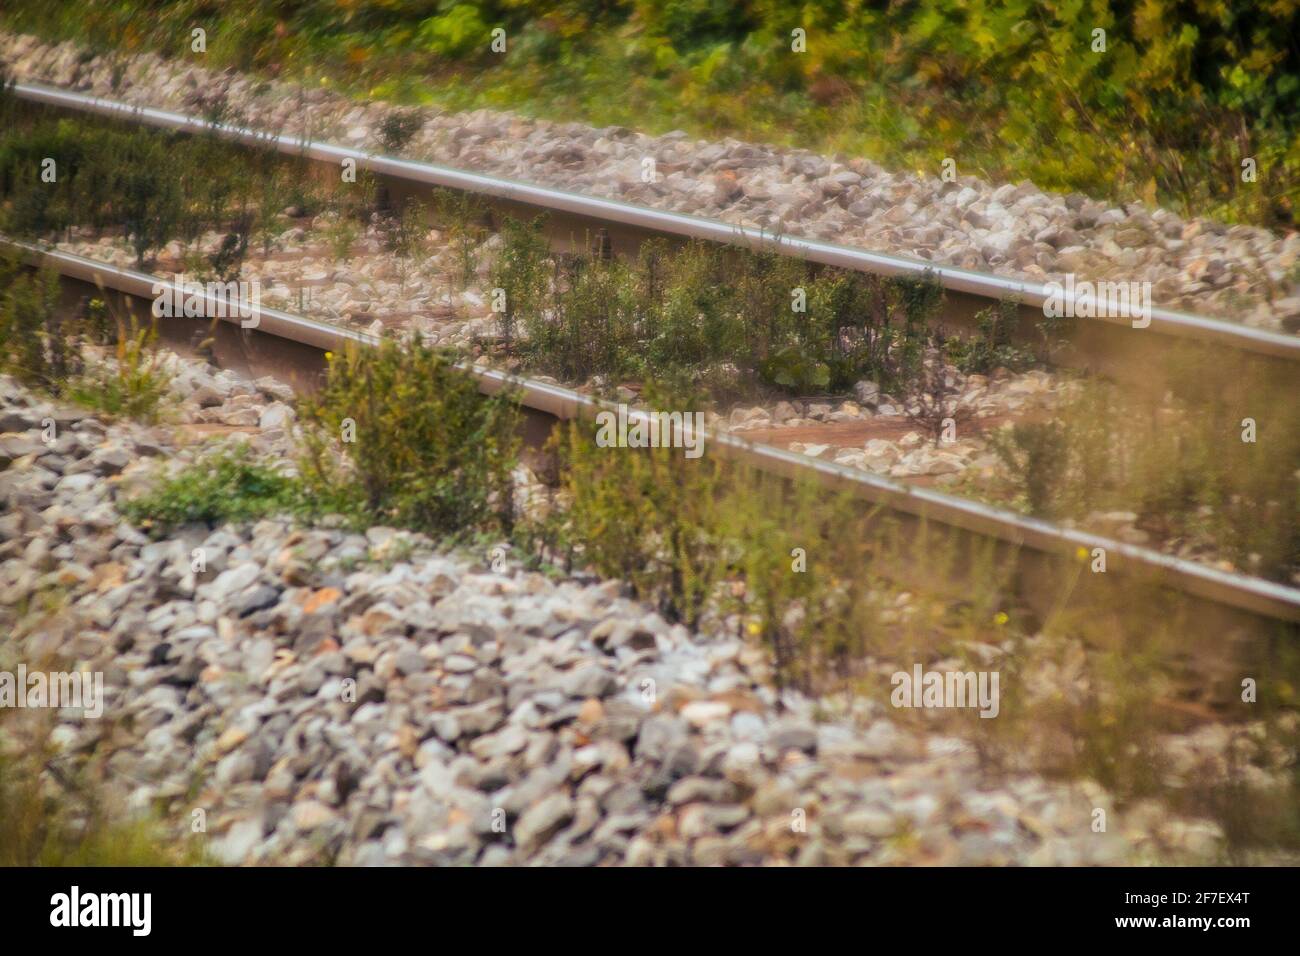 Poor condition of mainline train tracks. Heavy gauge normal train tracks with wooden sleepers but with grass growing up betwee gravel due to poor main Stock Photo